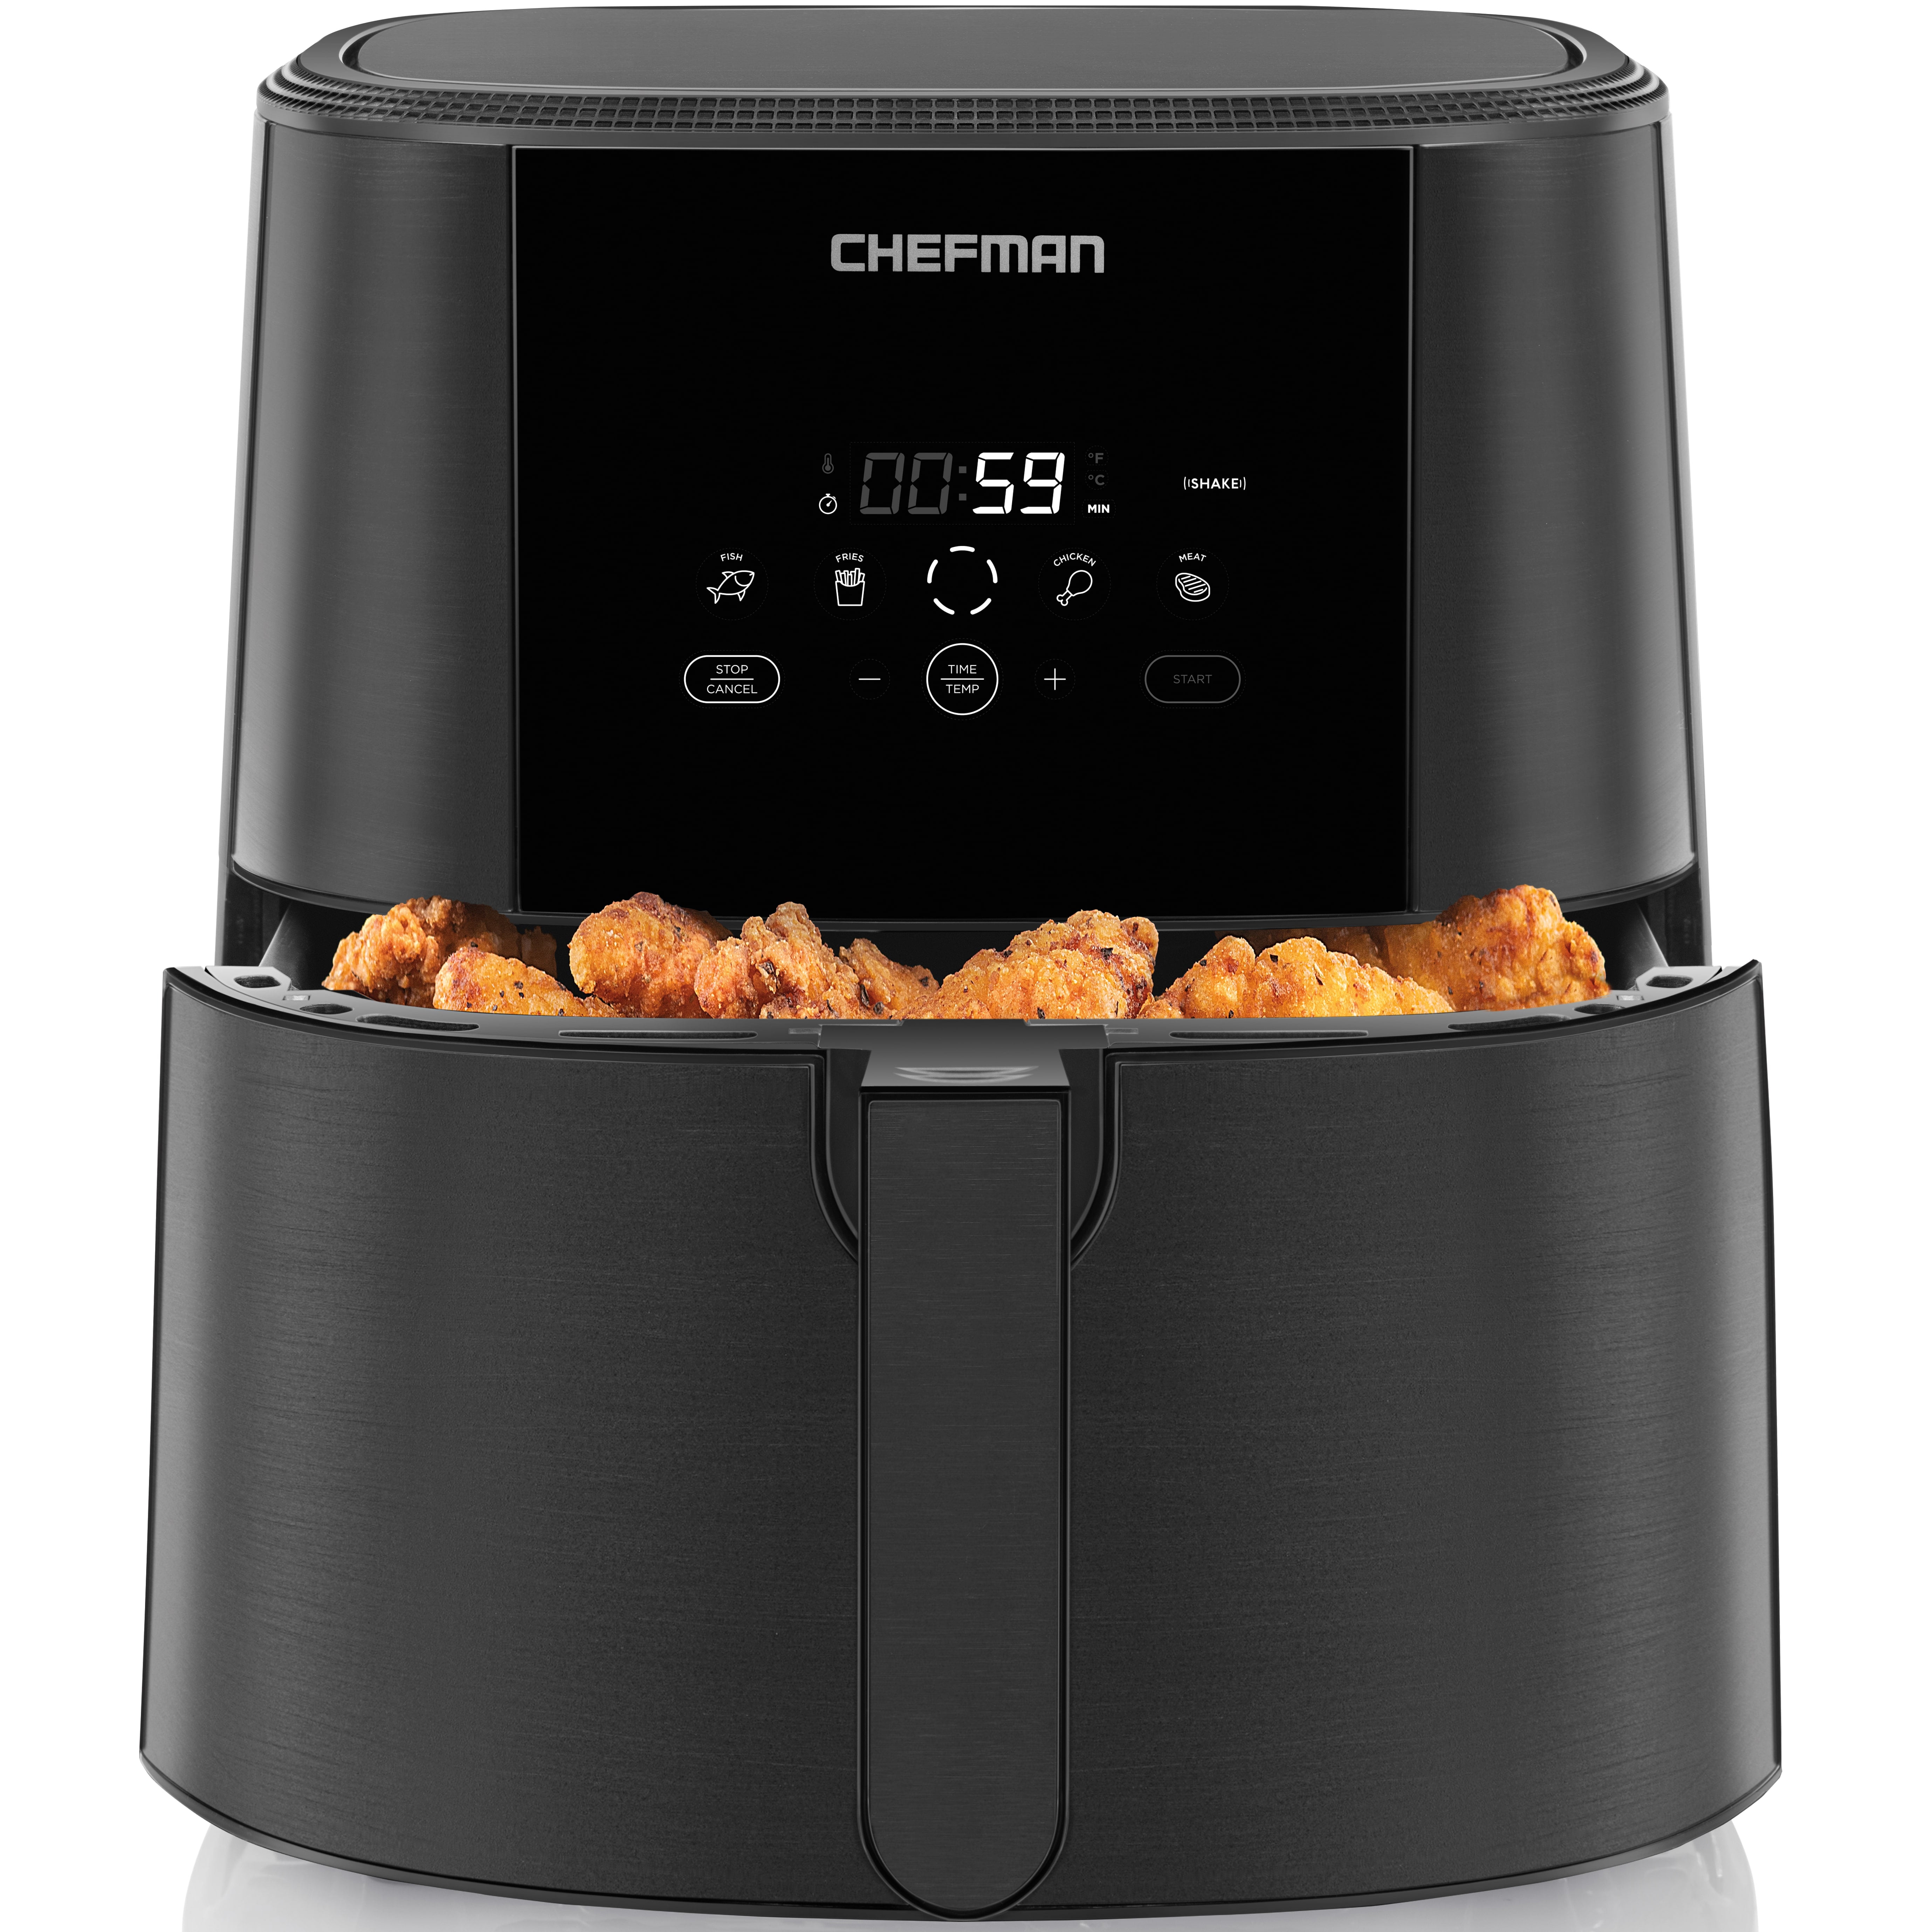 Fritaire, Self-Cleaning and BPA Free Glass Bowl Air Fryer, Orange